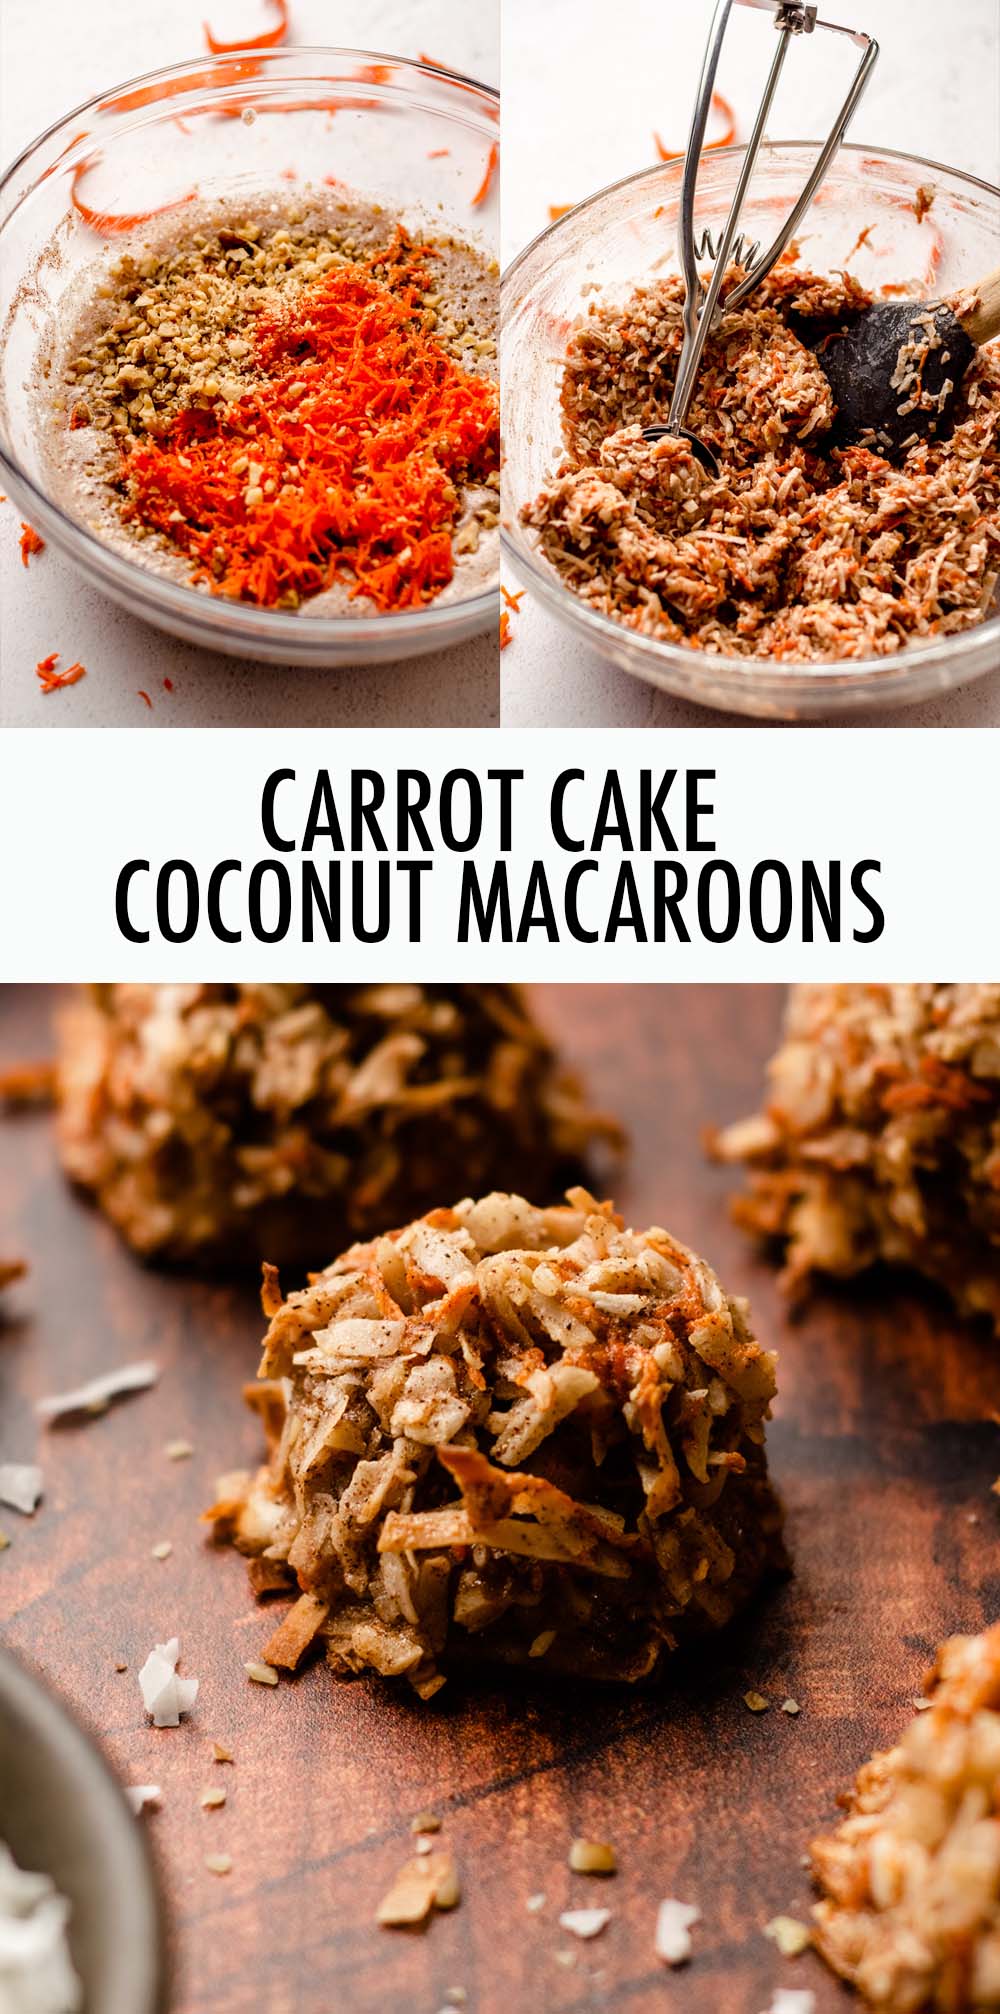 Crispy on the outside, moist and chewy on the inside, these easy coconut macaroons are filled with all of the flavors and warm spices of carrot cake. via @frshaprilflours